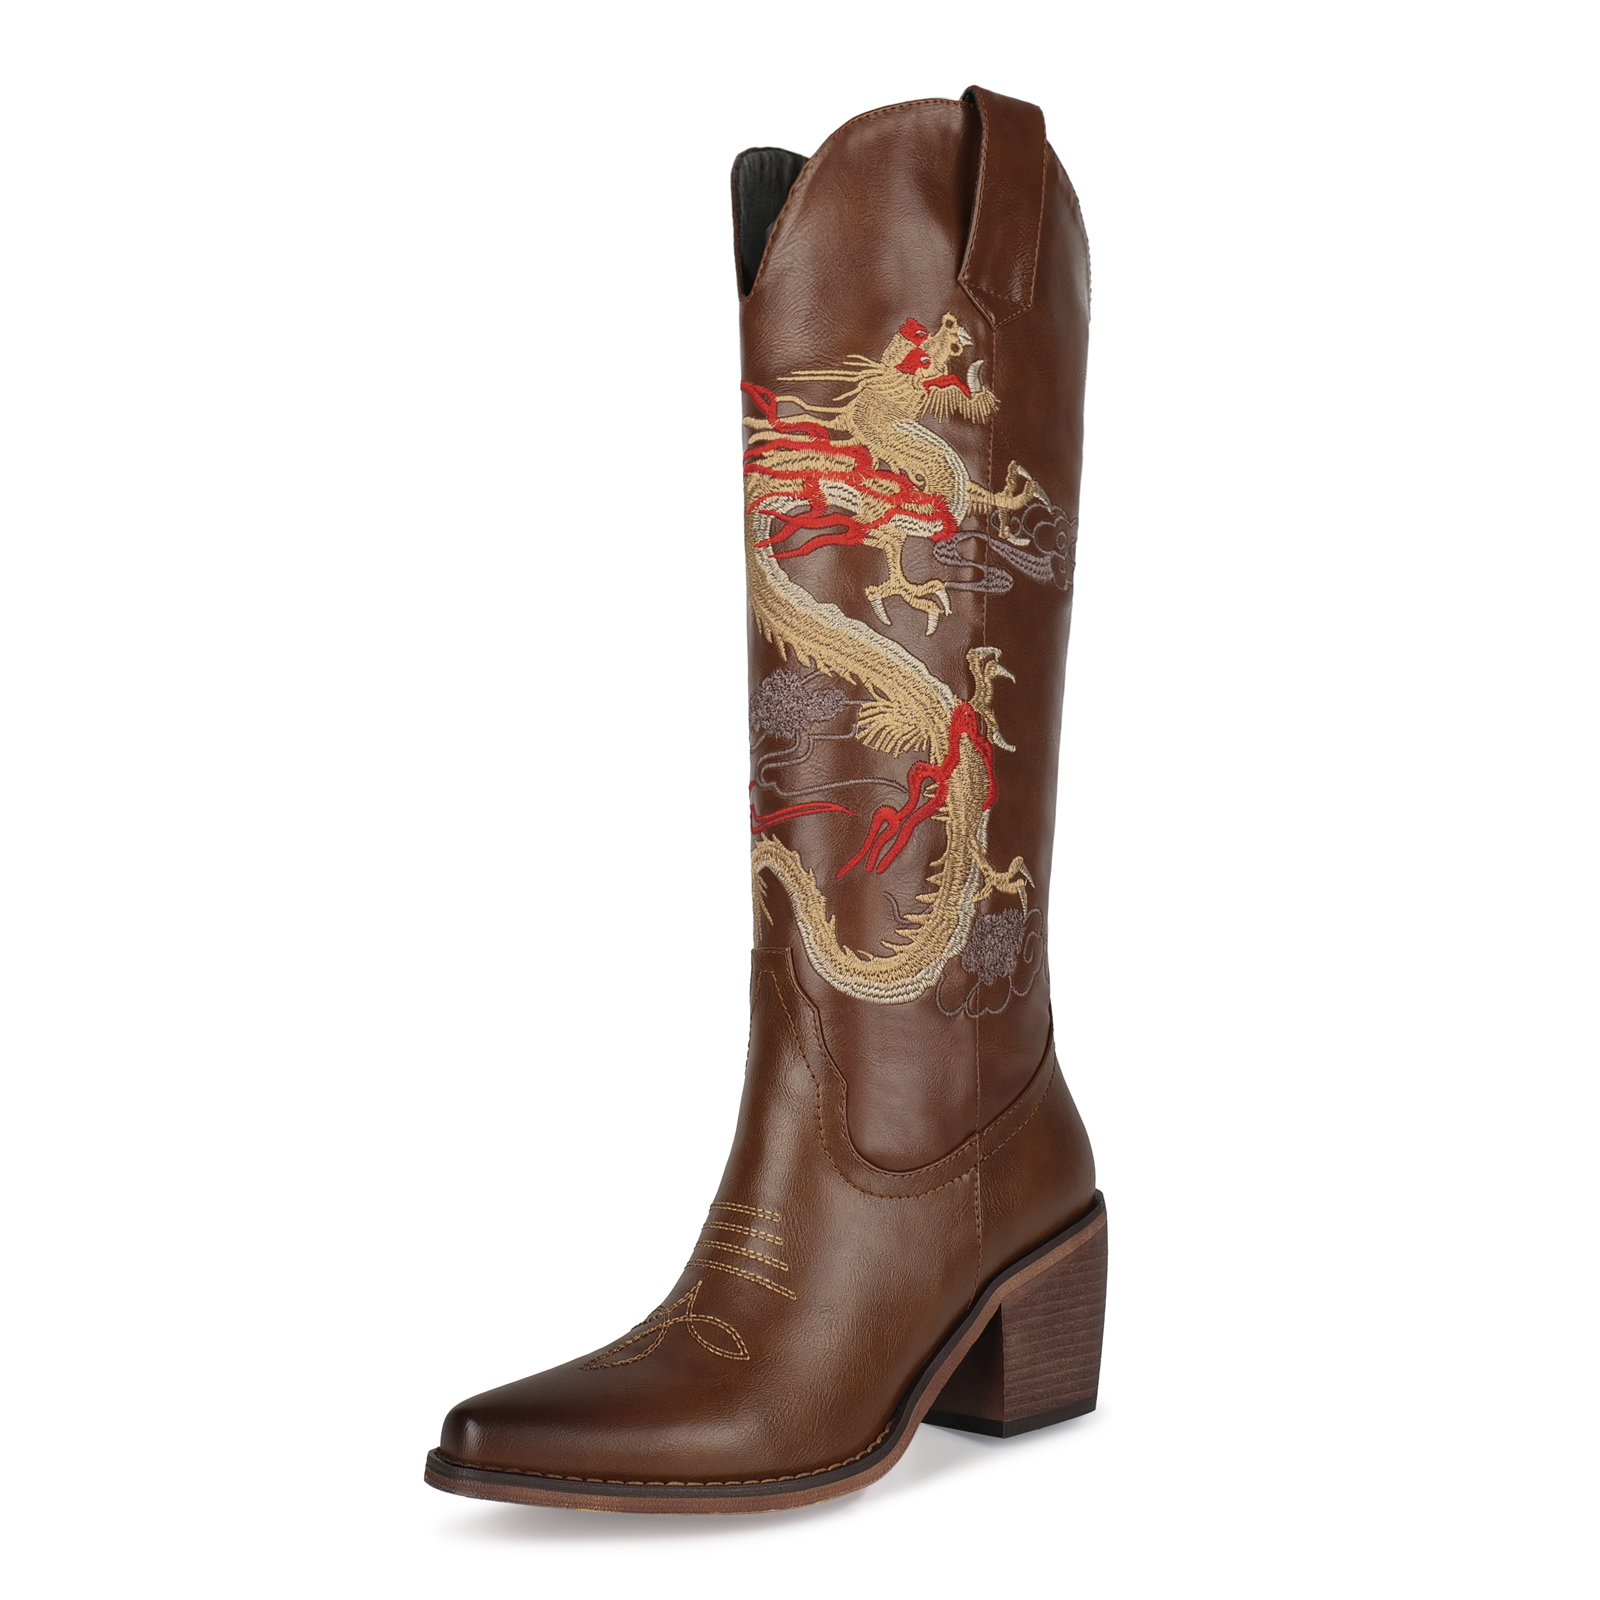 TAAFO Classic Dragon Embroidery Knee High Boots White Cowgirl Boots Chunky Heel Texas Cowboy Boots